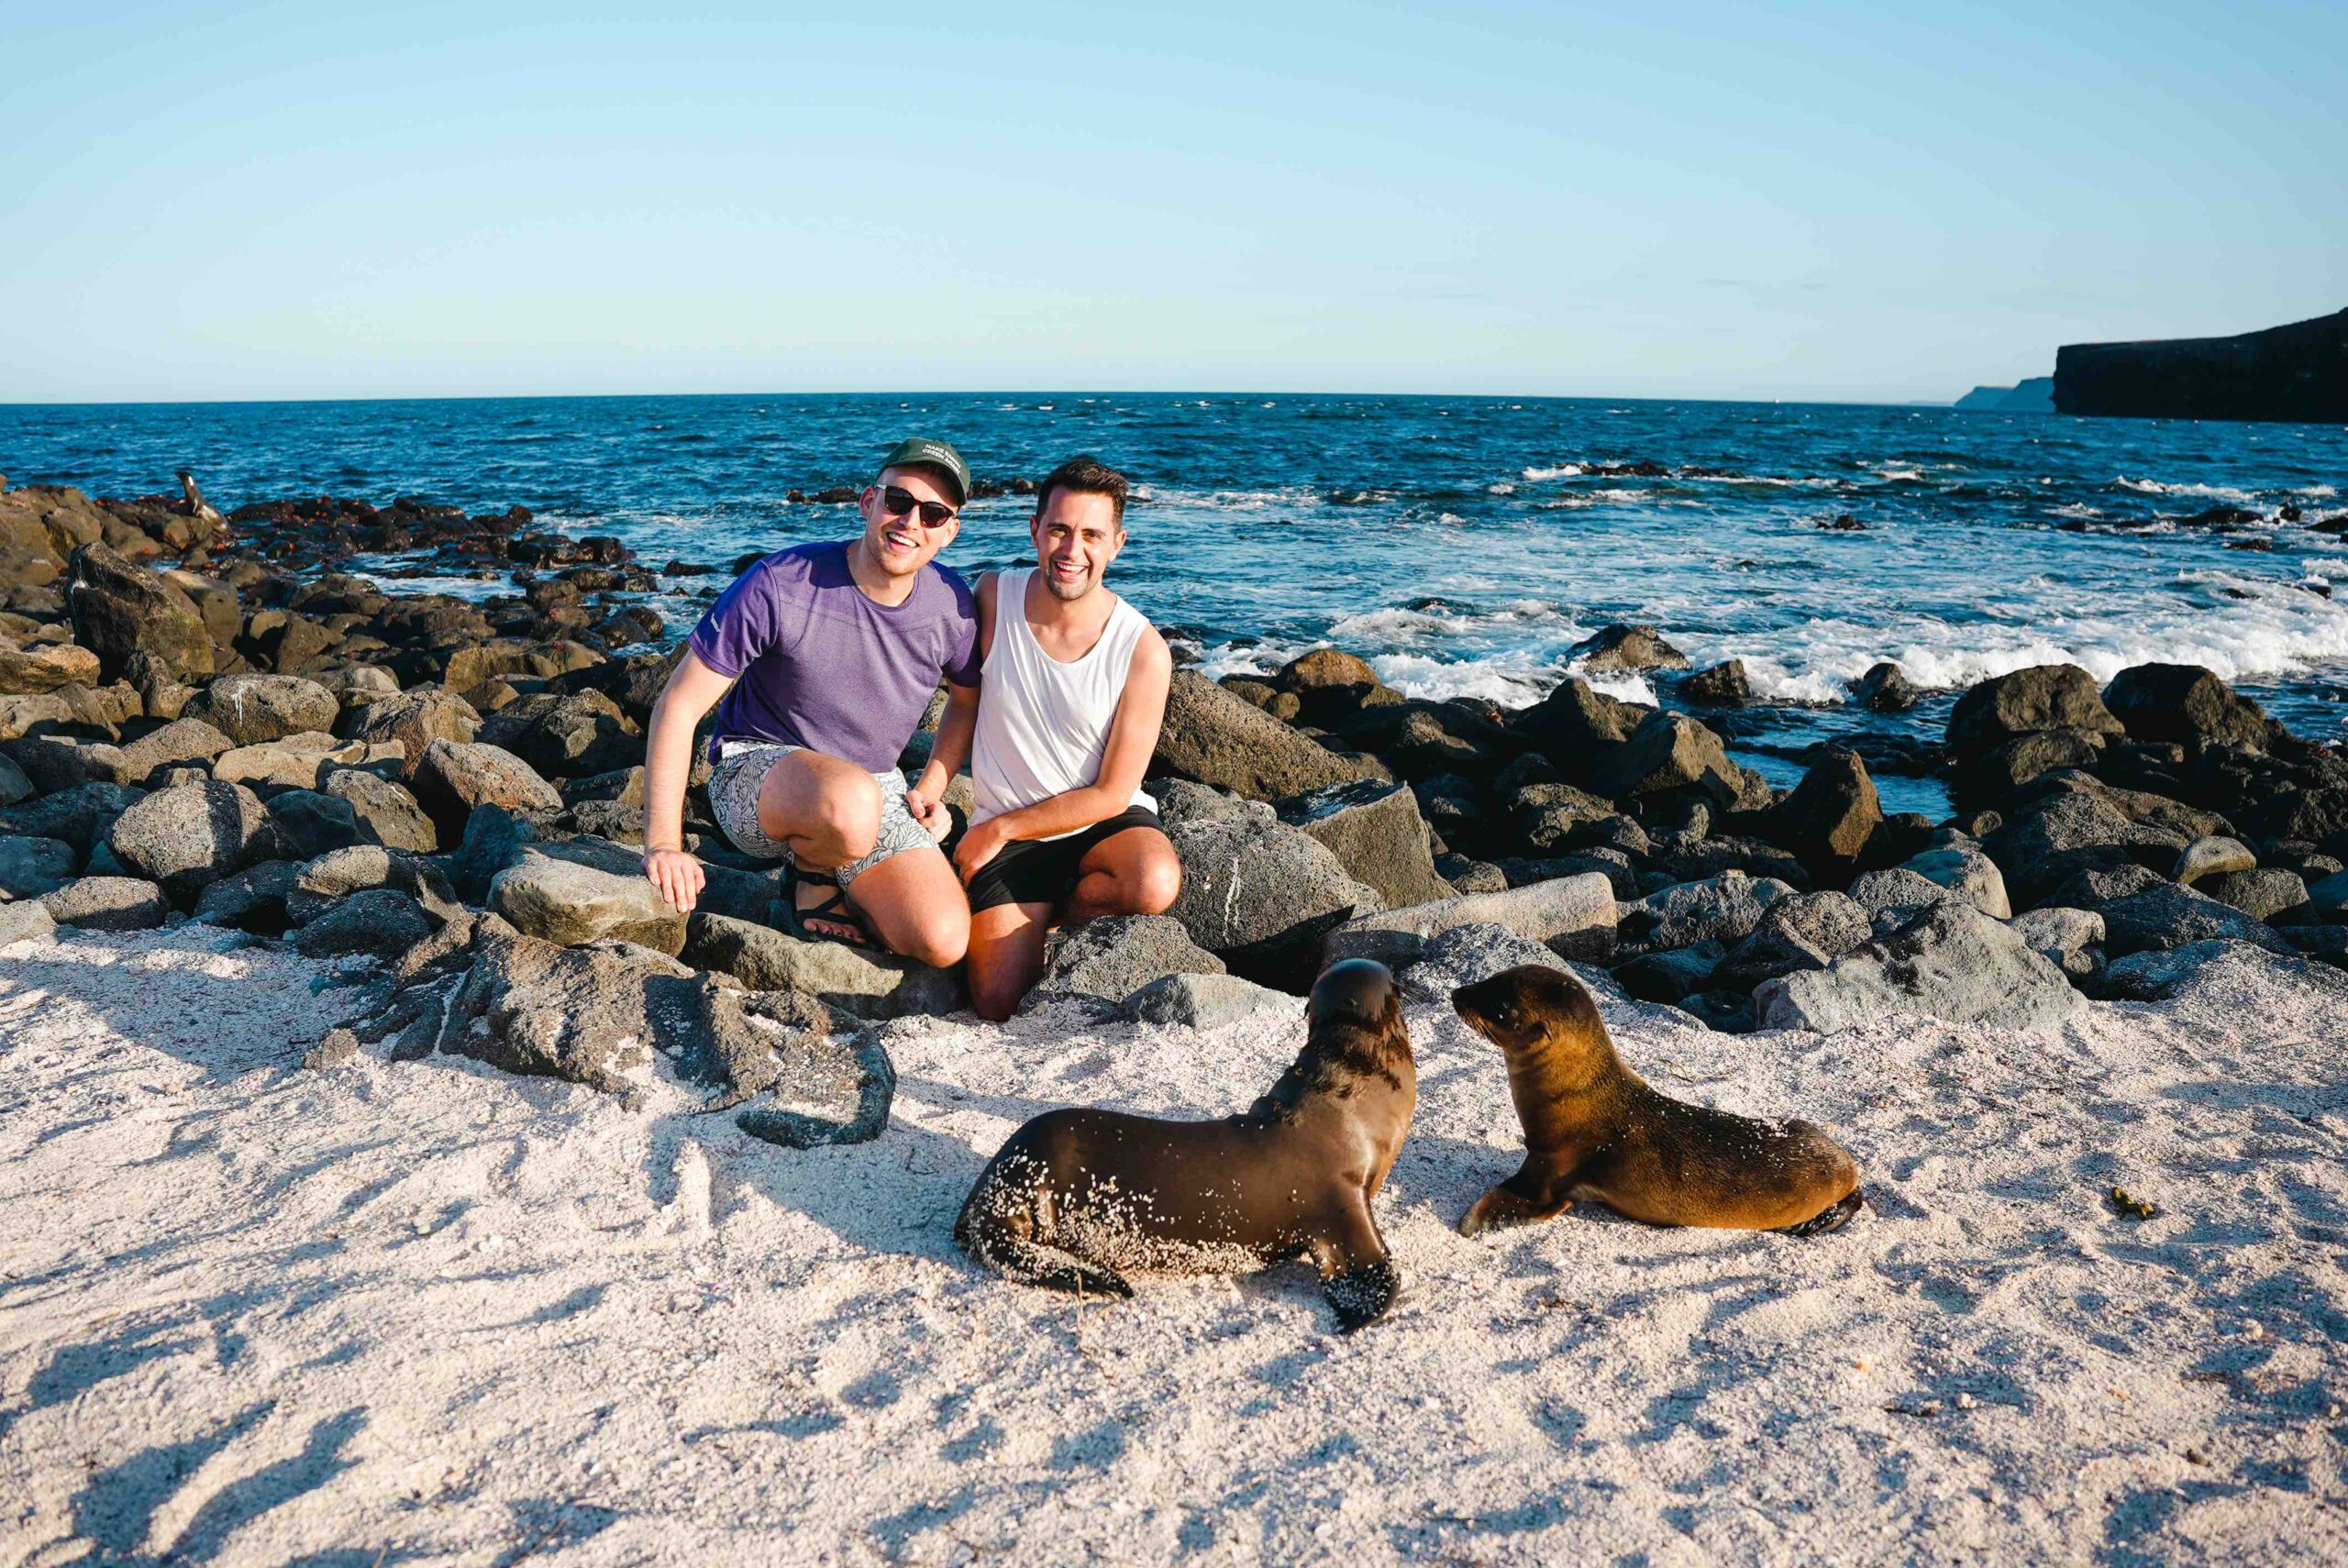 Baby Sea Lions in the Mosquera Islet, Home to one of the Largest Colonies of Sea Lions in the Galápagos (Photo Credit: Hurtigruten Expeditions)